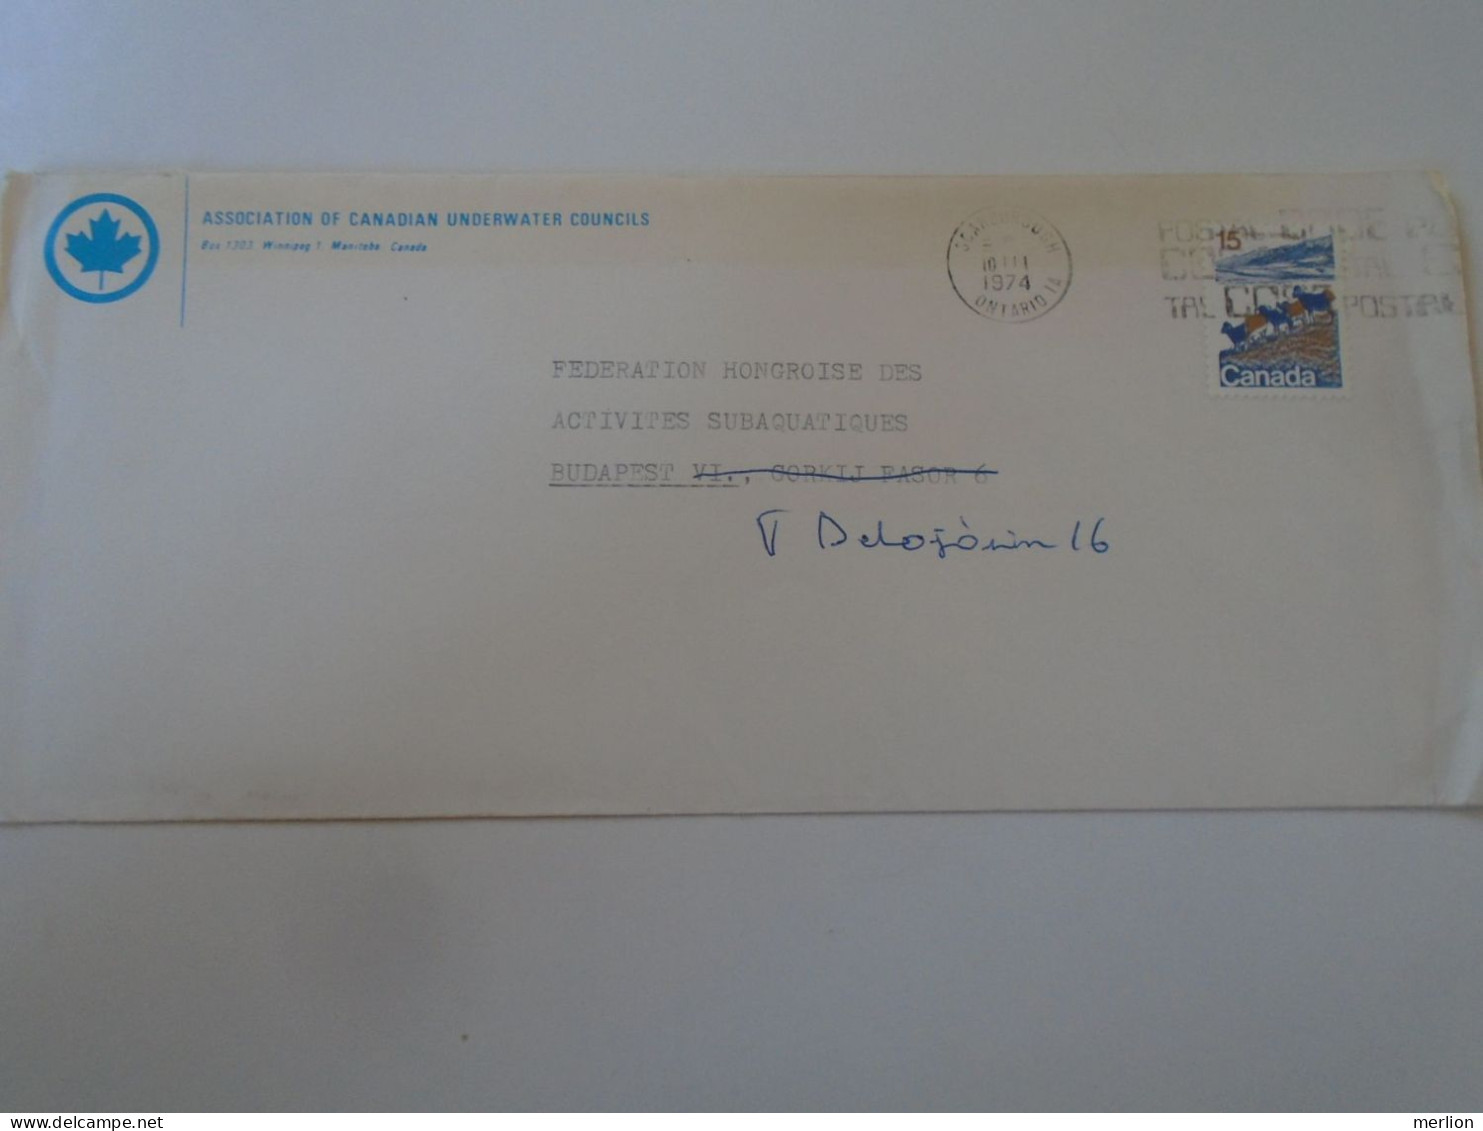 D198187  Canada  Airmail Cover 1974  Scarborough  Ontario - Underwater Councils   - Sent To Hungary - Covers & Documents